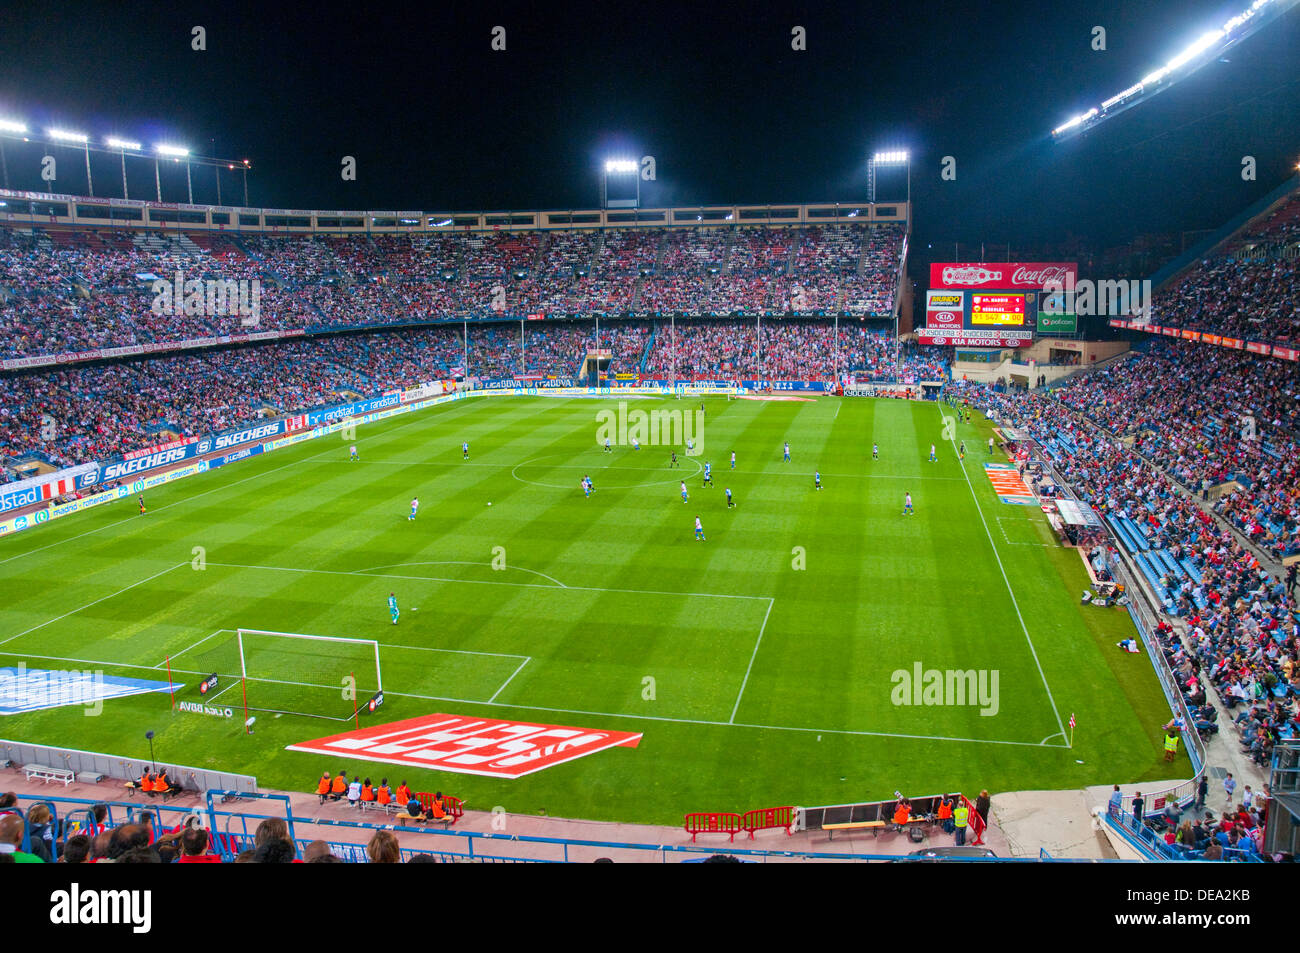 Vicente calderon stadium outside hi-res stock photography and images - Alamy